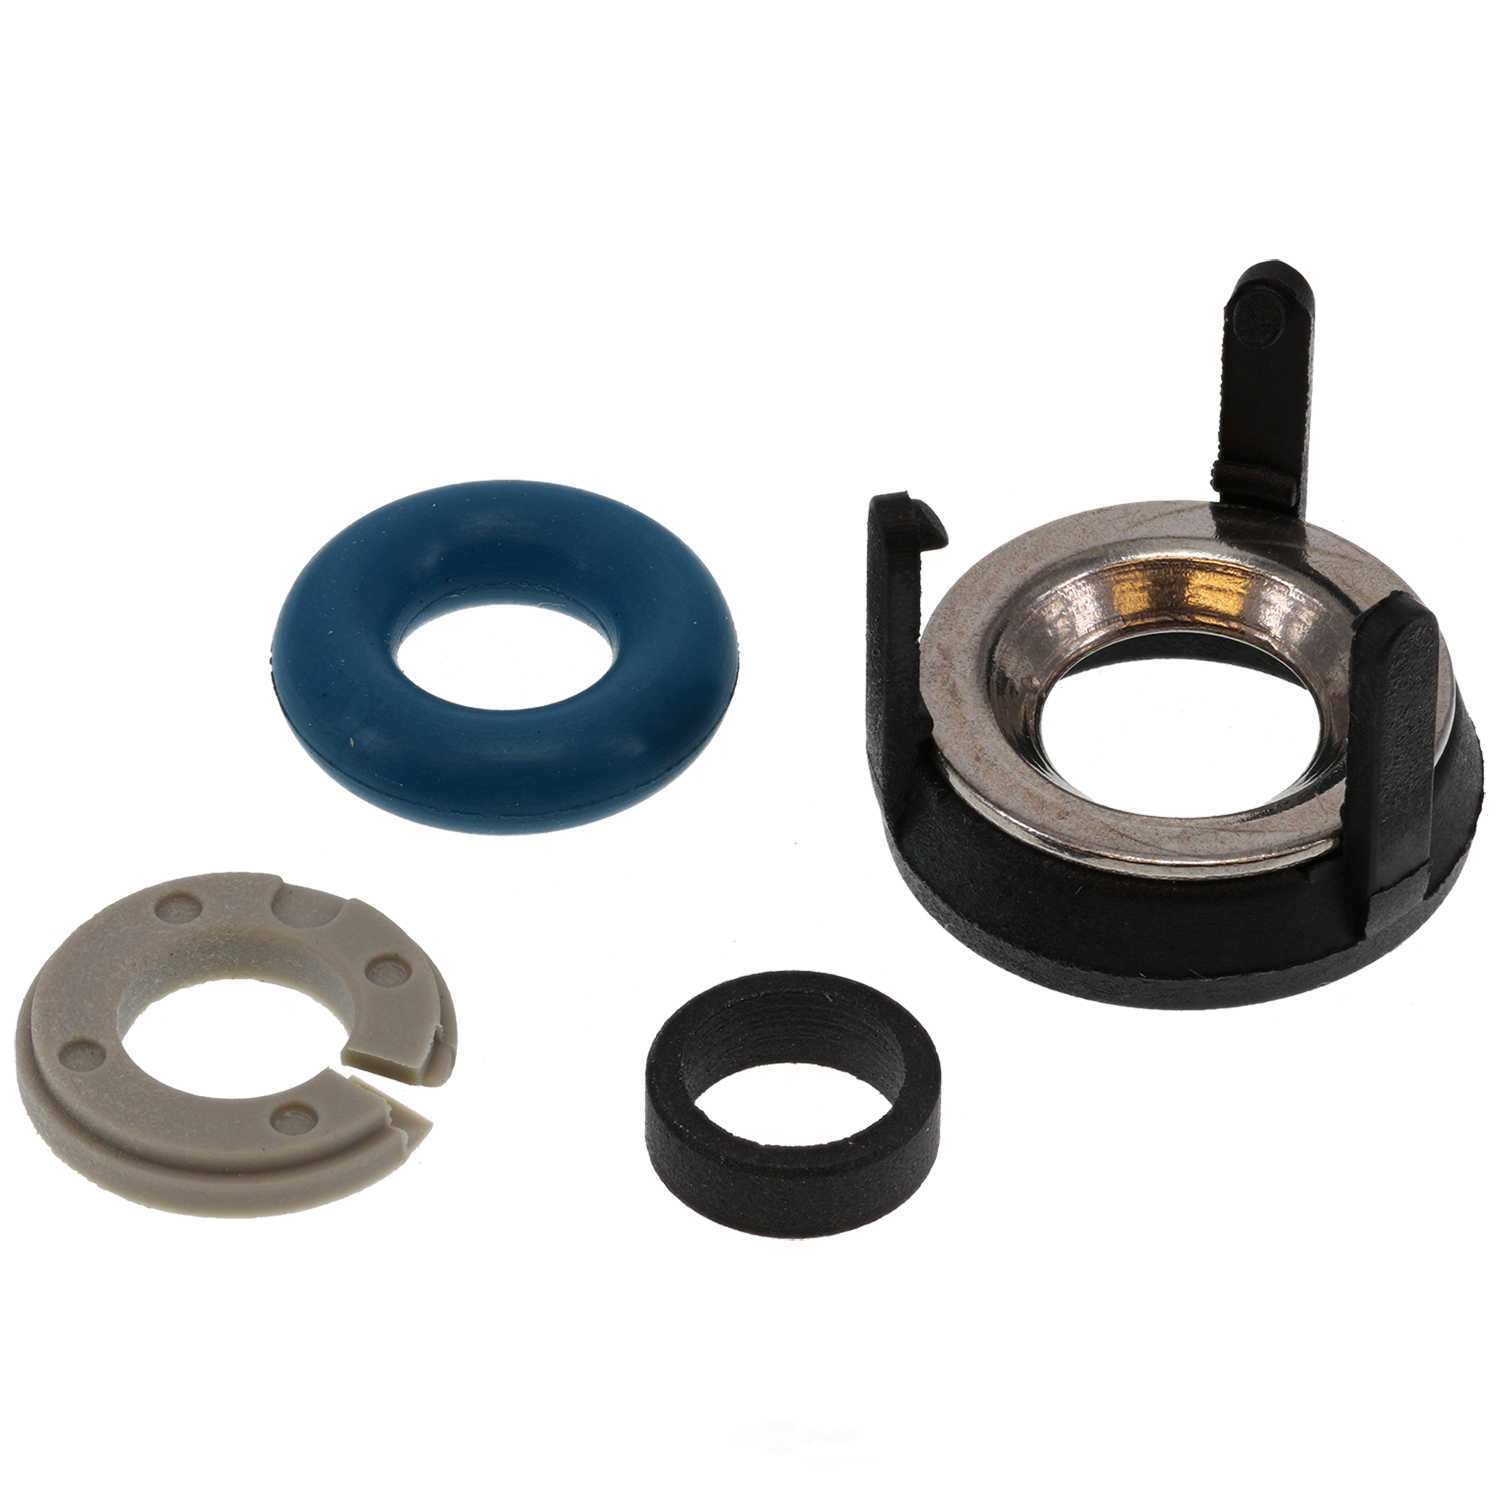 GB REMANUFACTURING INC. - Fuel Injector Seal Kit - GBR 8-070